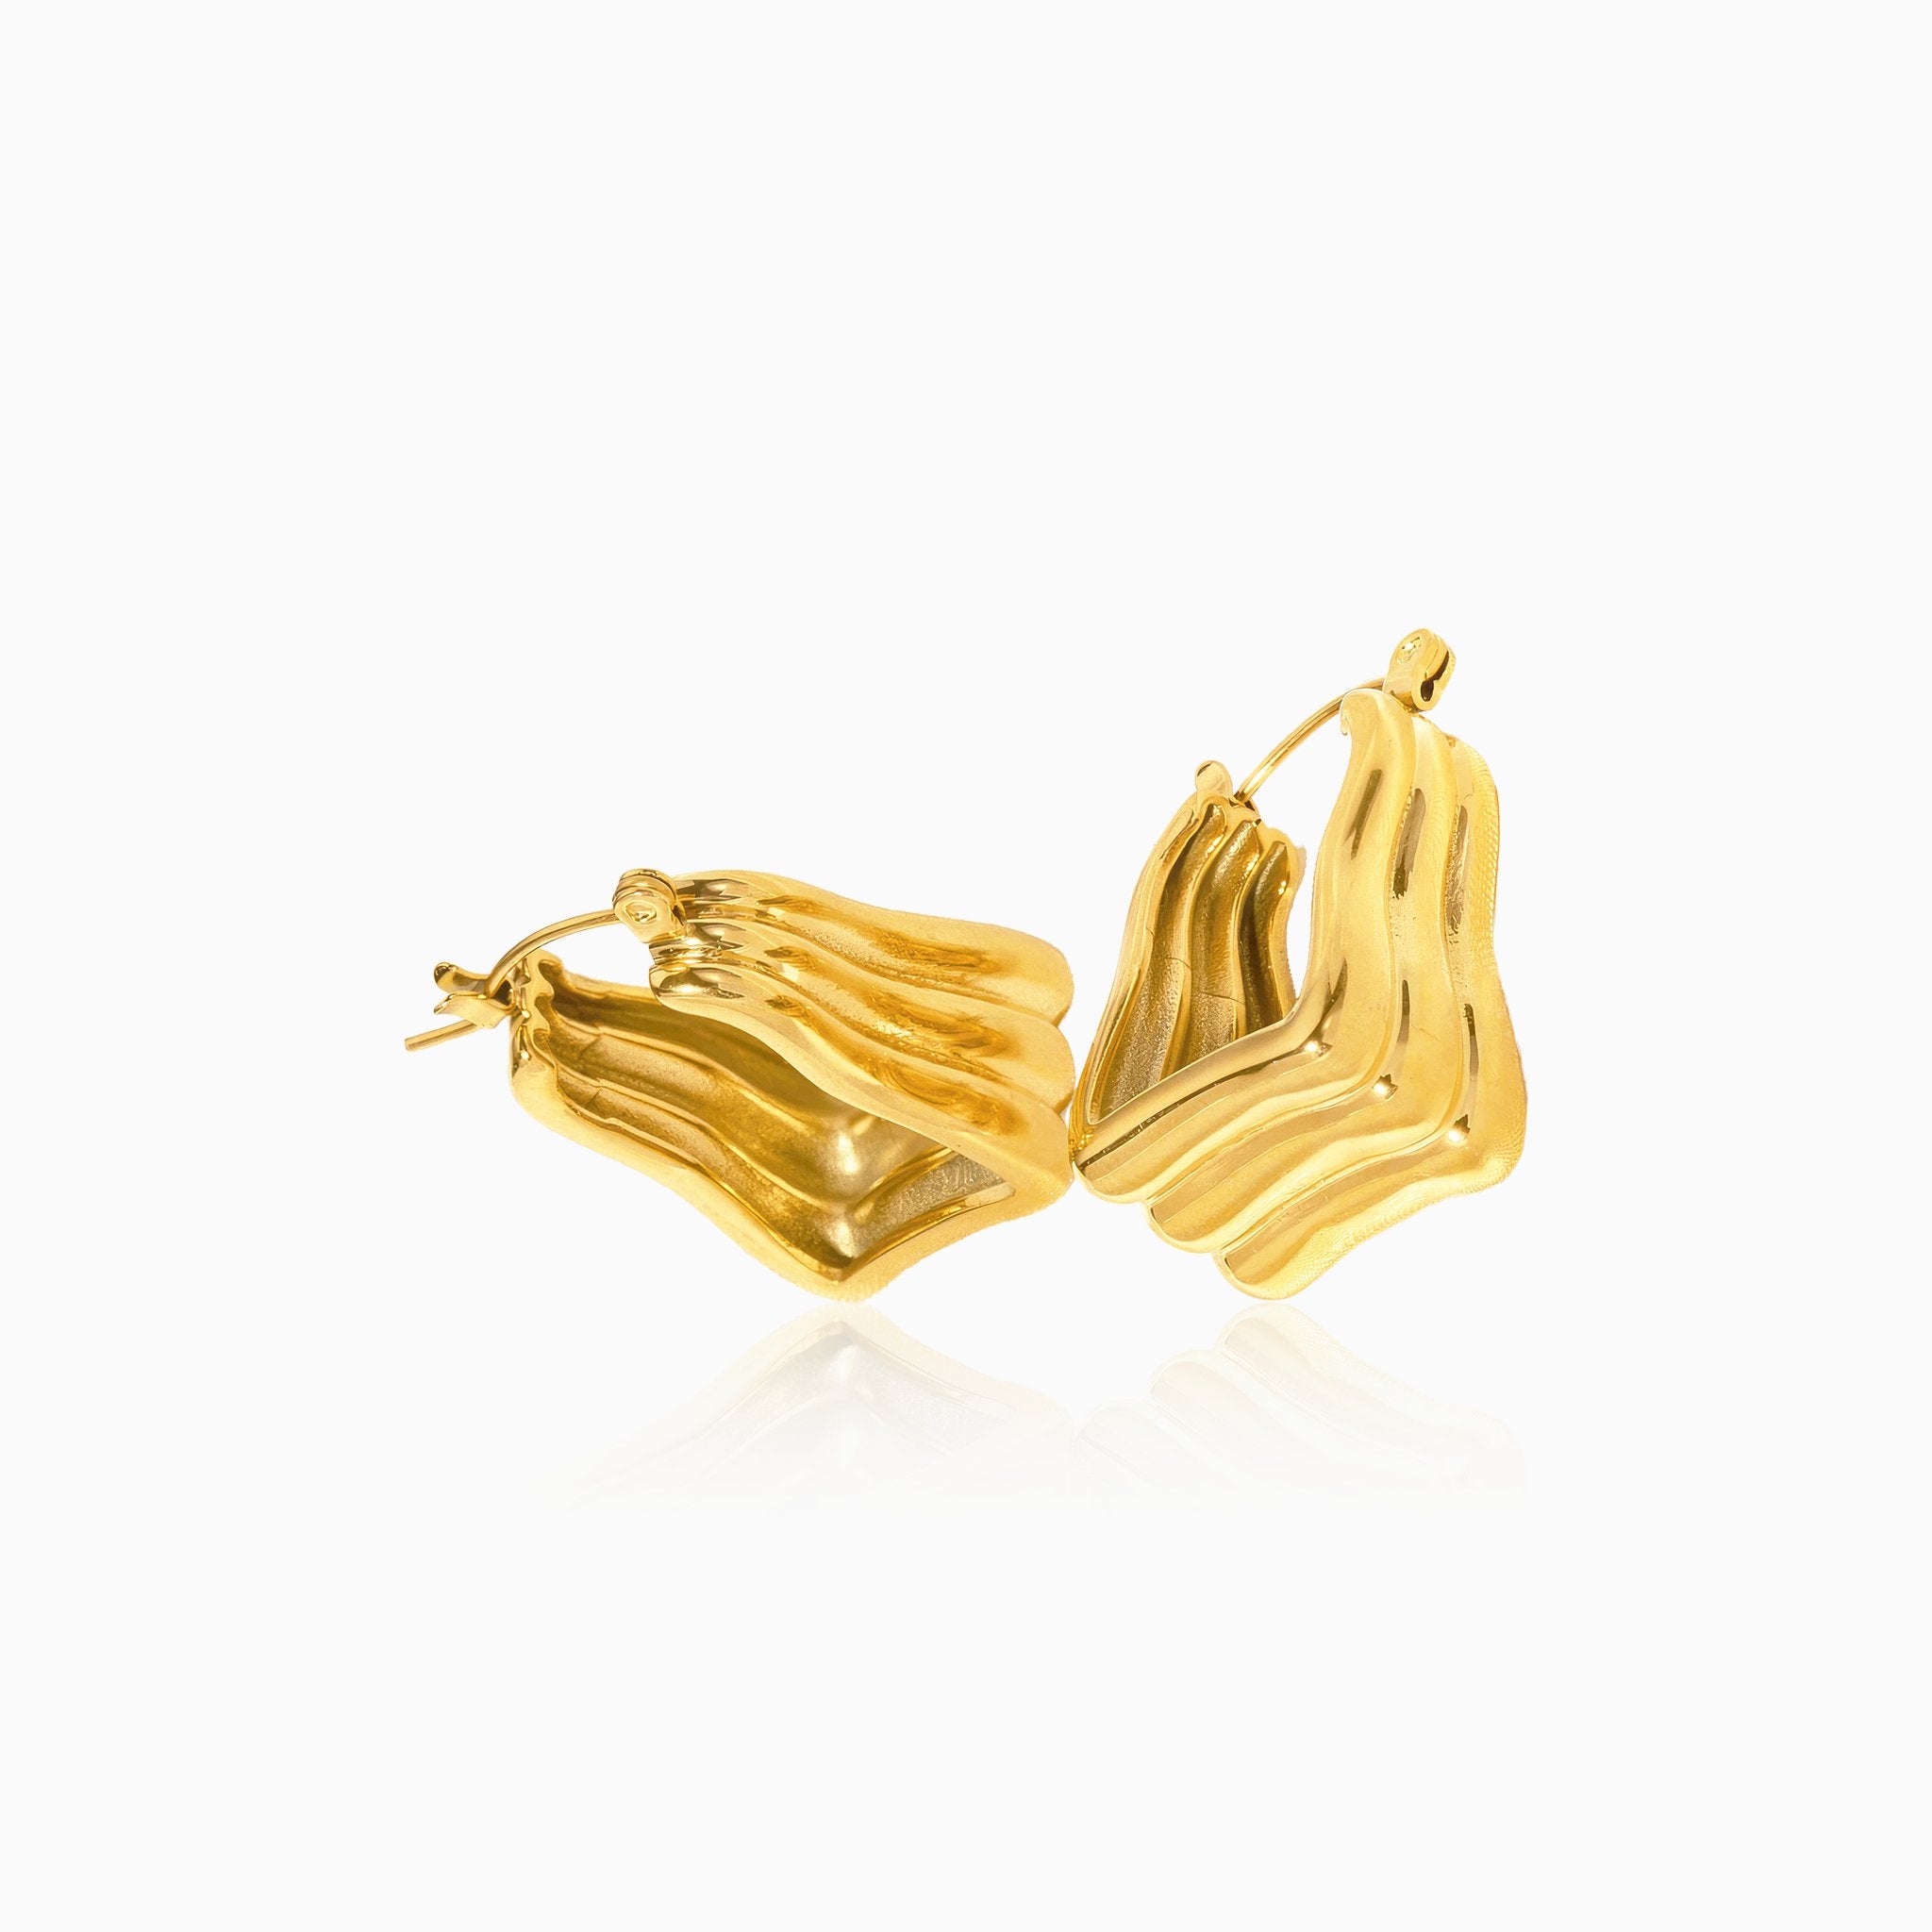 Triangle Stripe Design Earrings - Nobbier - Earrings - 18K Gold And Titanium PVD Coated Jewelry